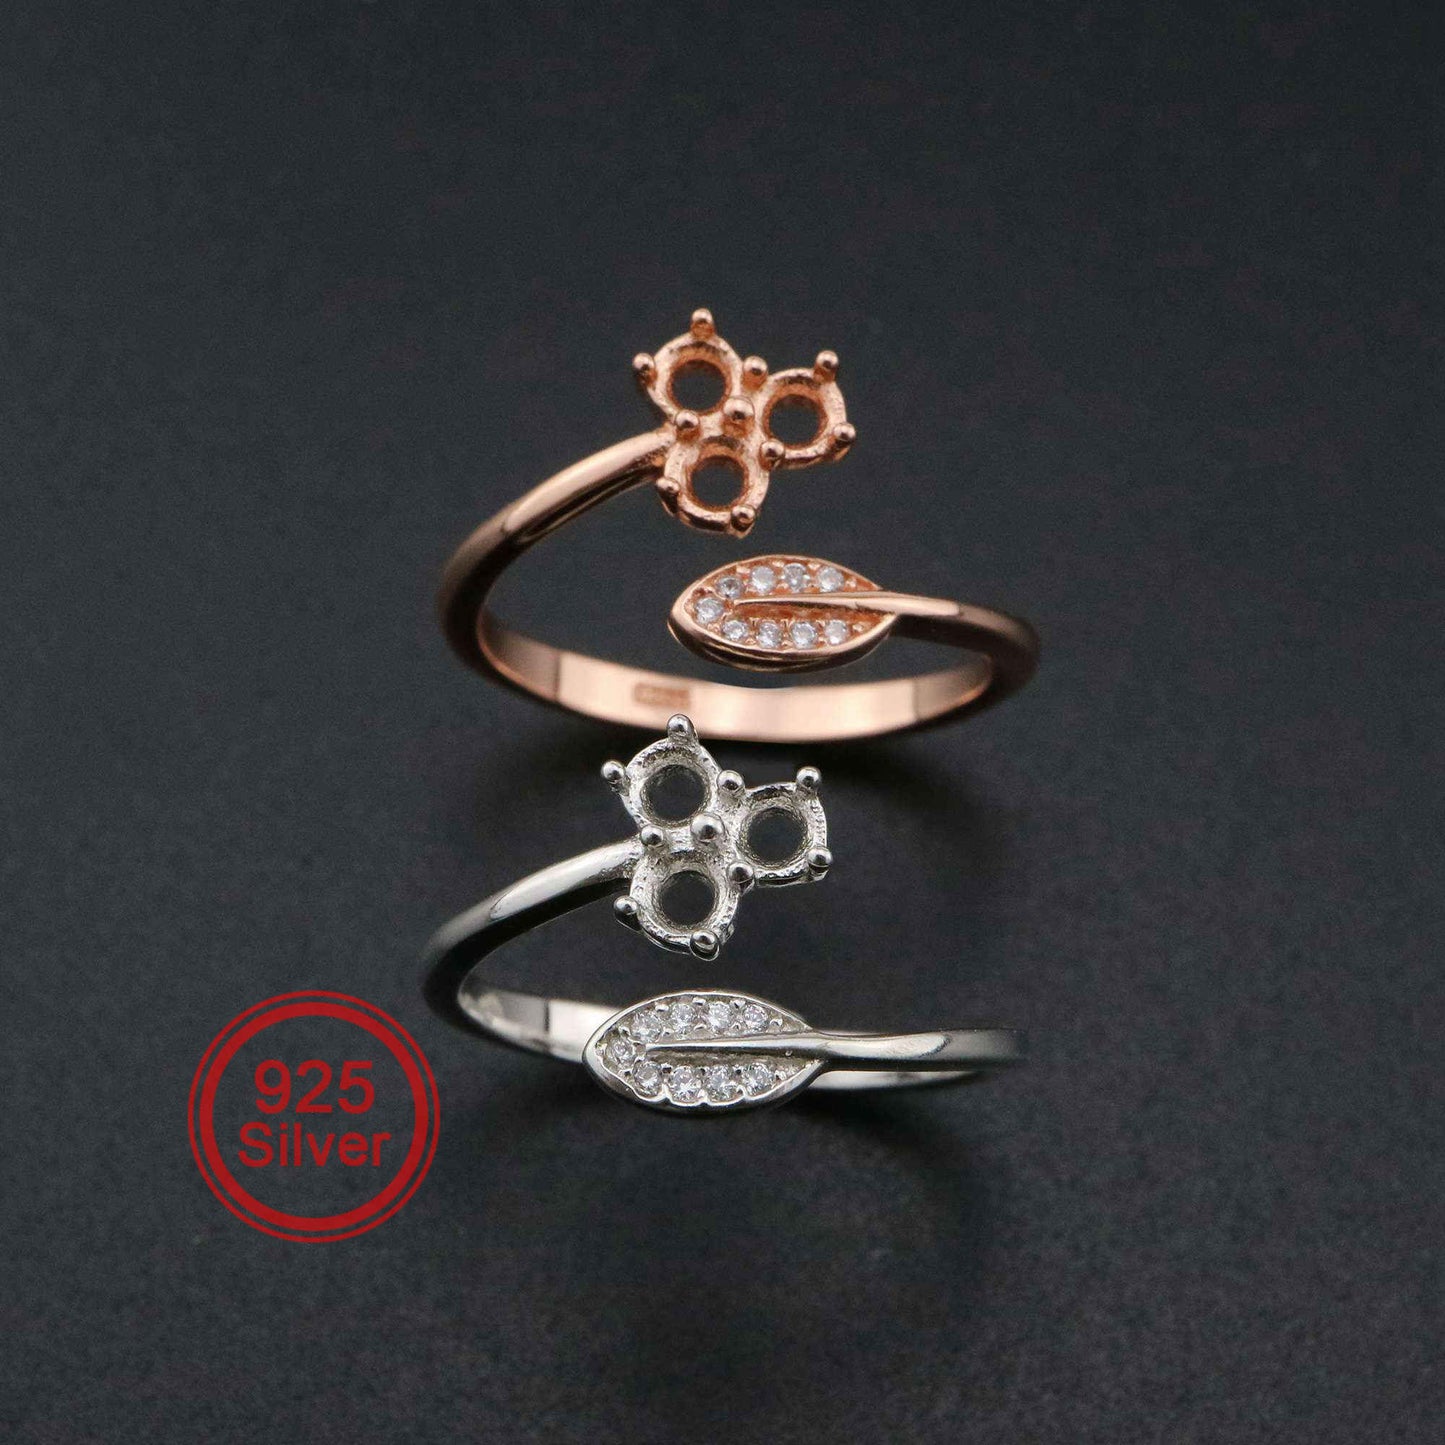 One silver and one rose gold bypass rings setting with a leaf on one side and a semi mount for three small round gems on the other.